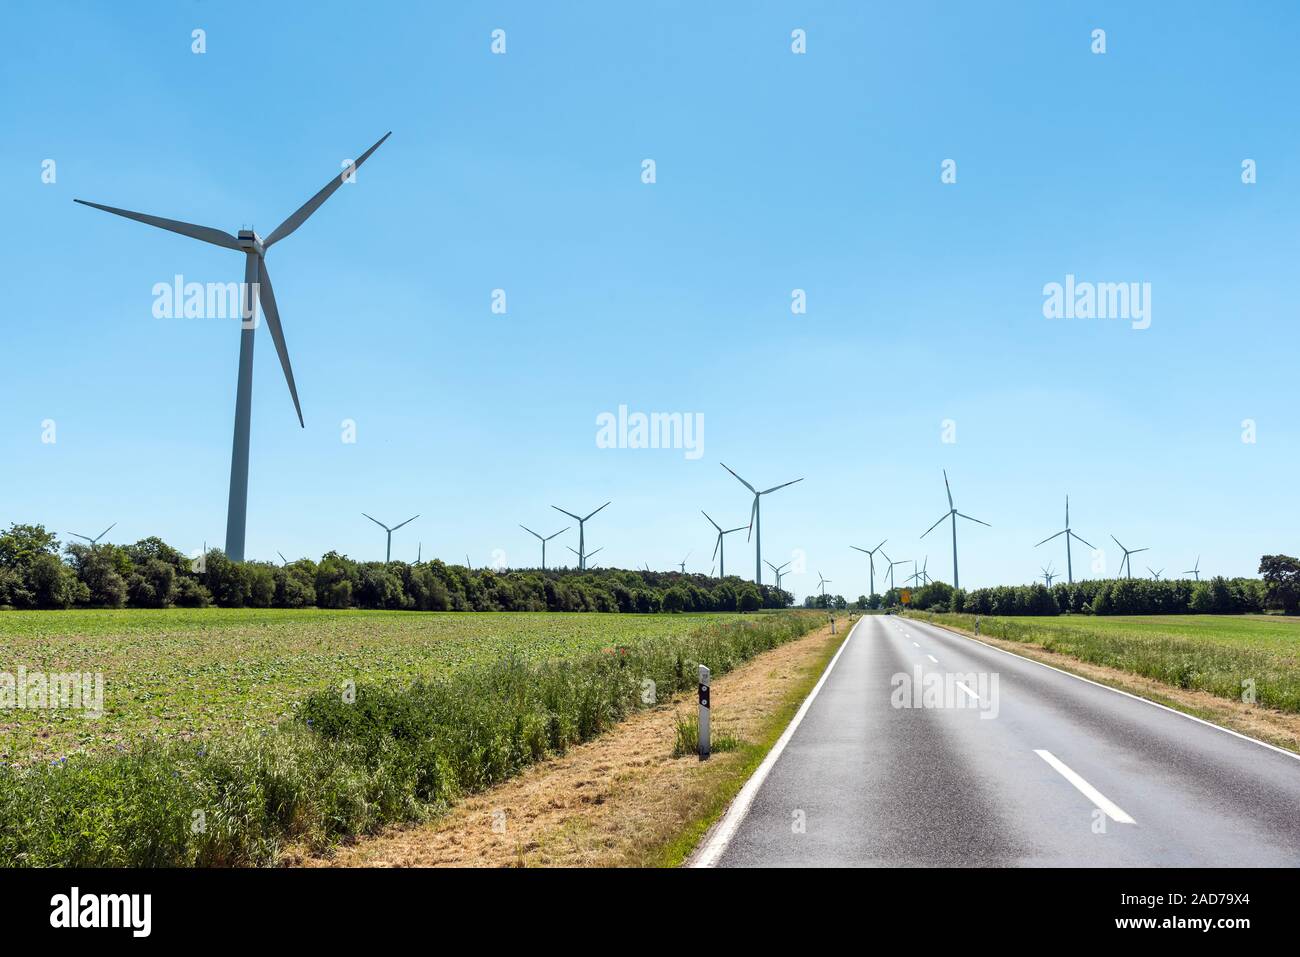 Wind power plants and a country road seen in Germany Stock Photo